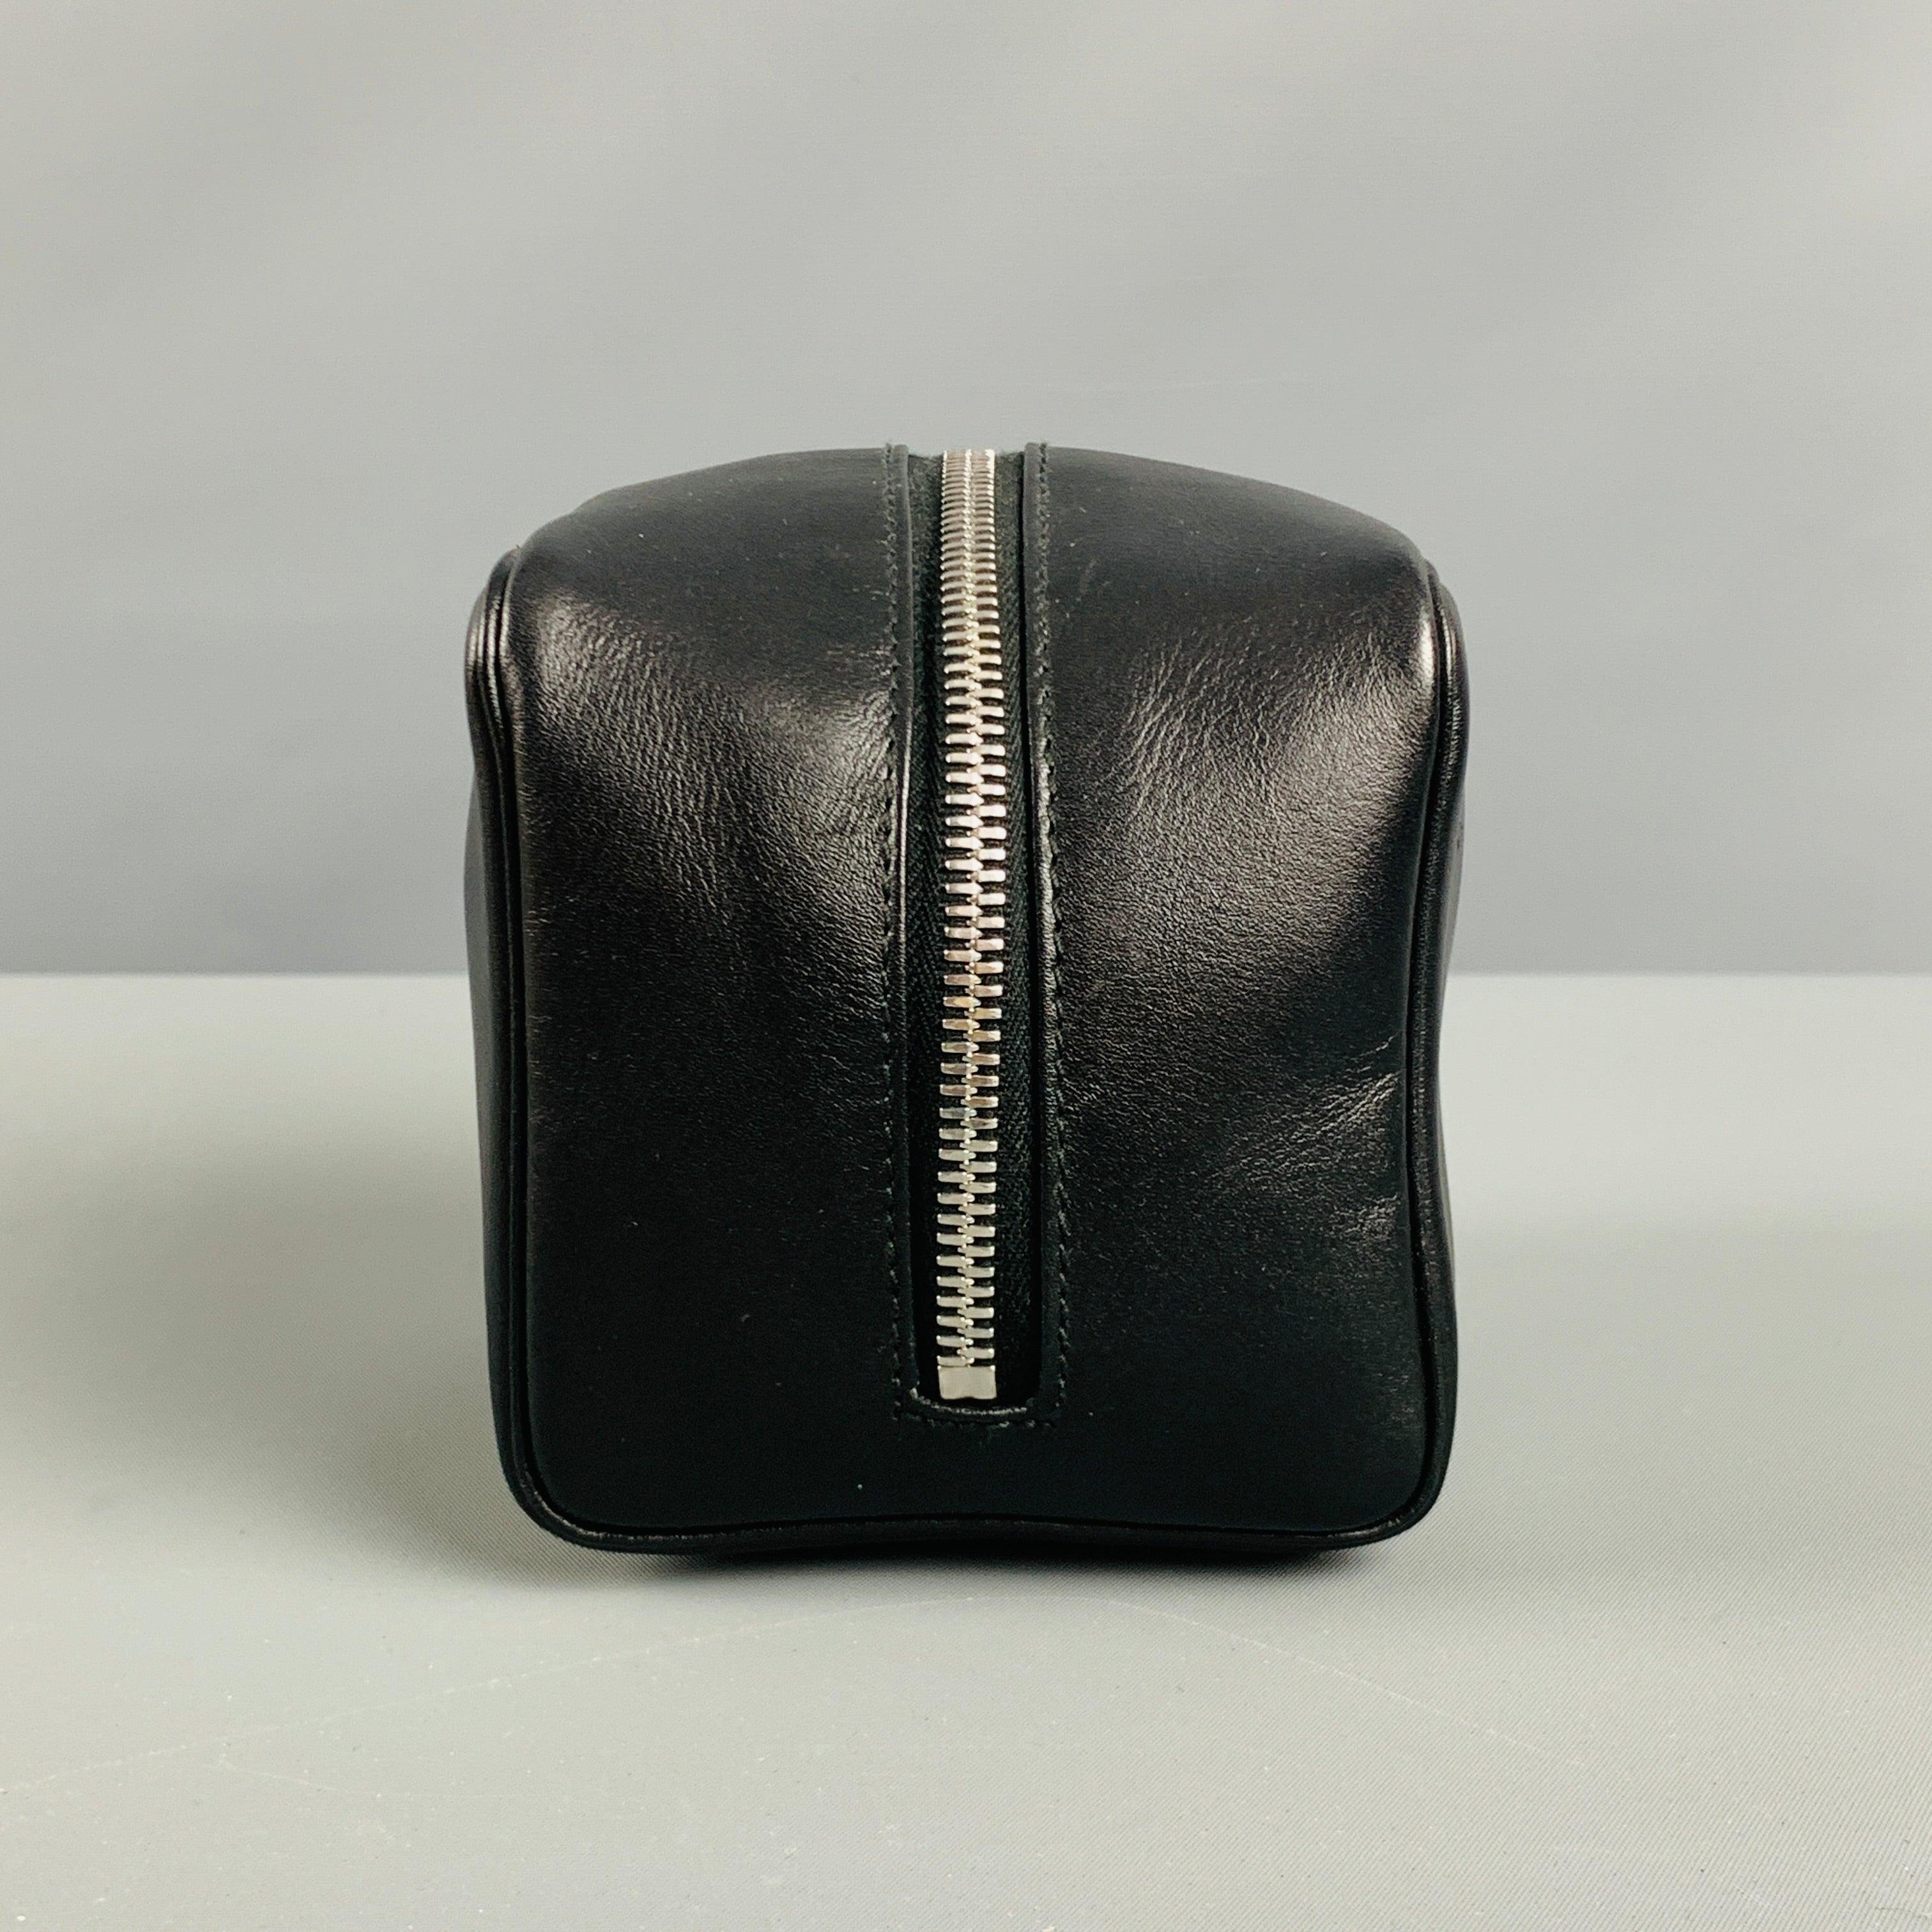 BALLY toiletry bag comes in black leather material featuring a zipper closure. Excellent Pre-Owned Condition. 

Marked:   KELAS GB A C 

Measurements: 
  Length: 4 inches Width: 4 inches Height: 4 inches 
  
  
 
Reference No.: 129200
Category: